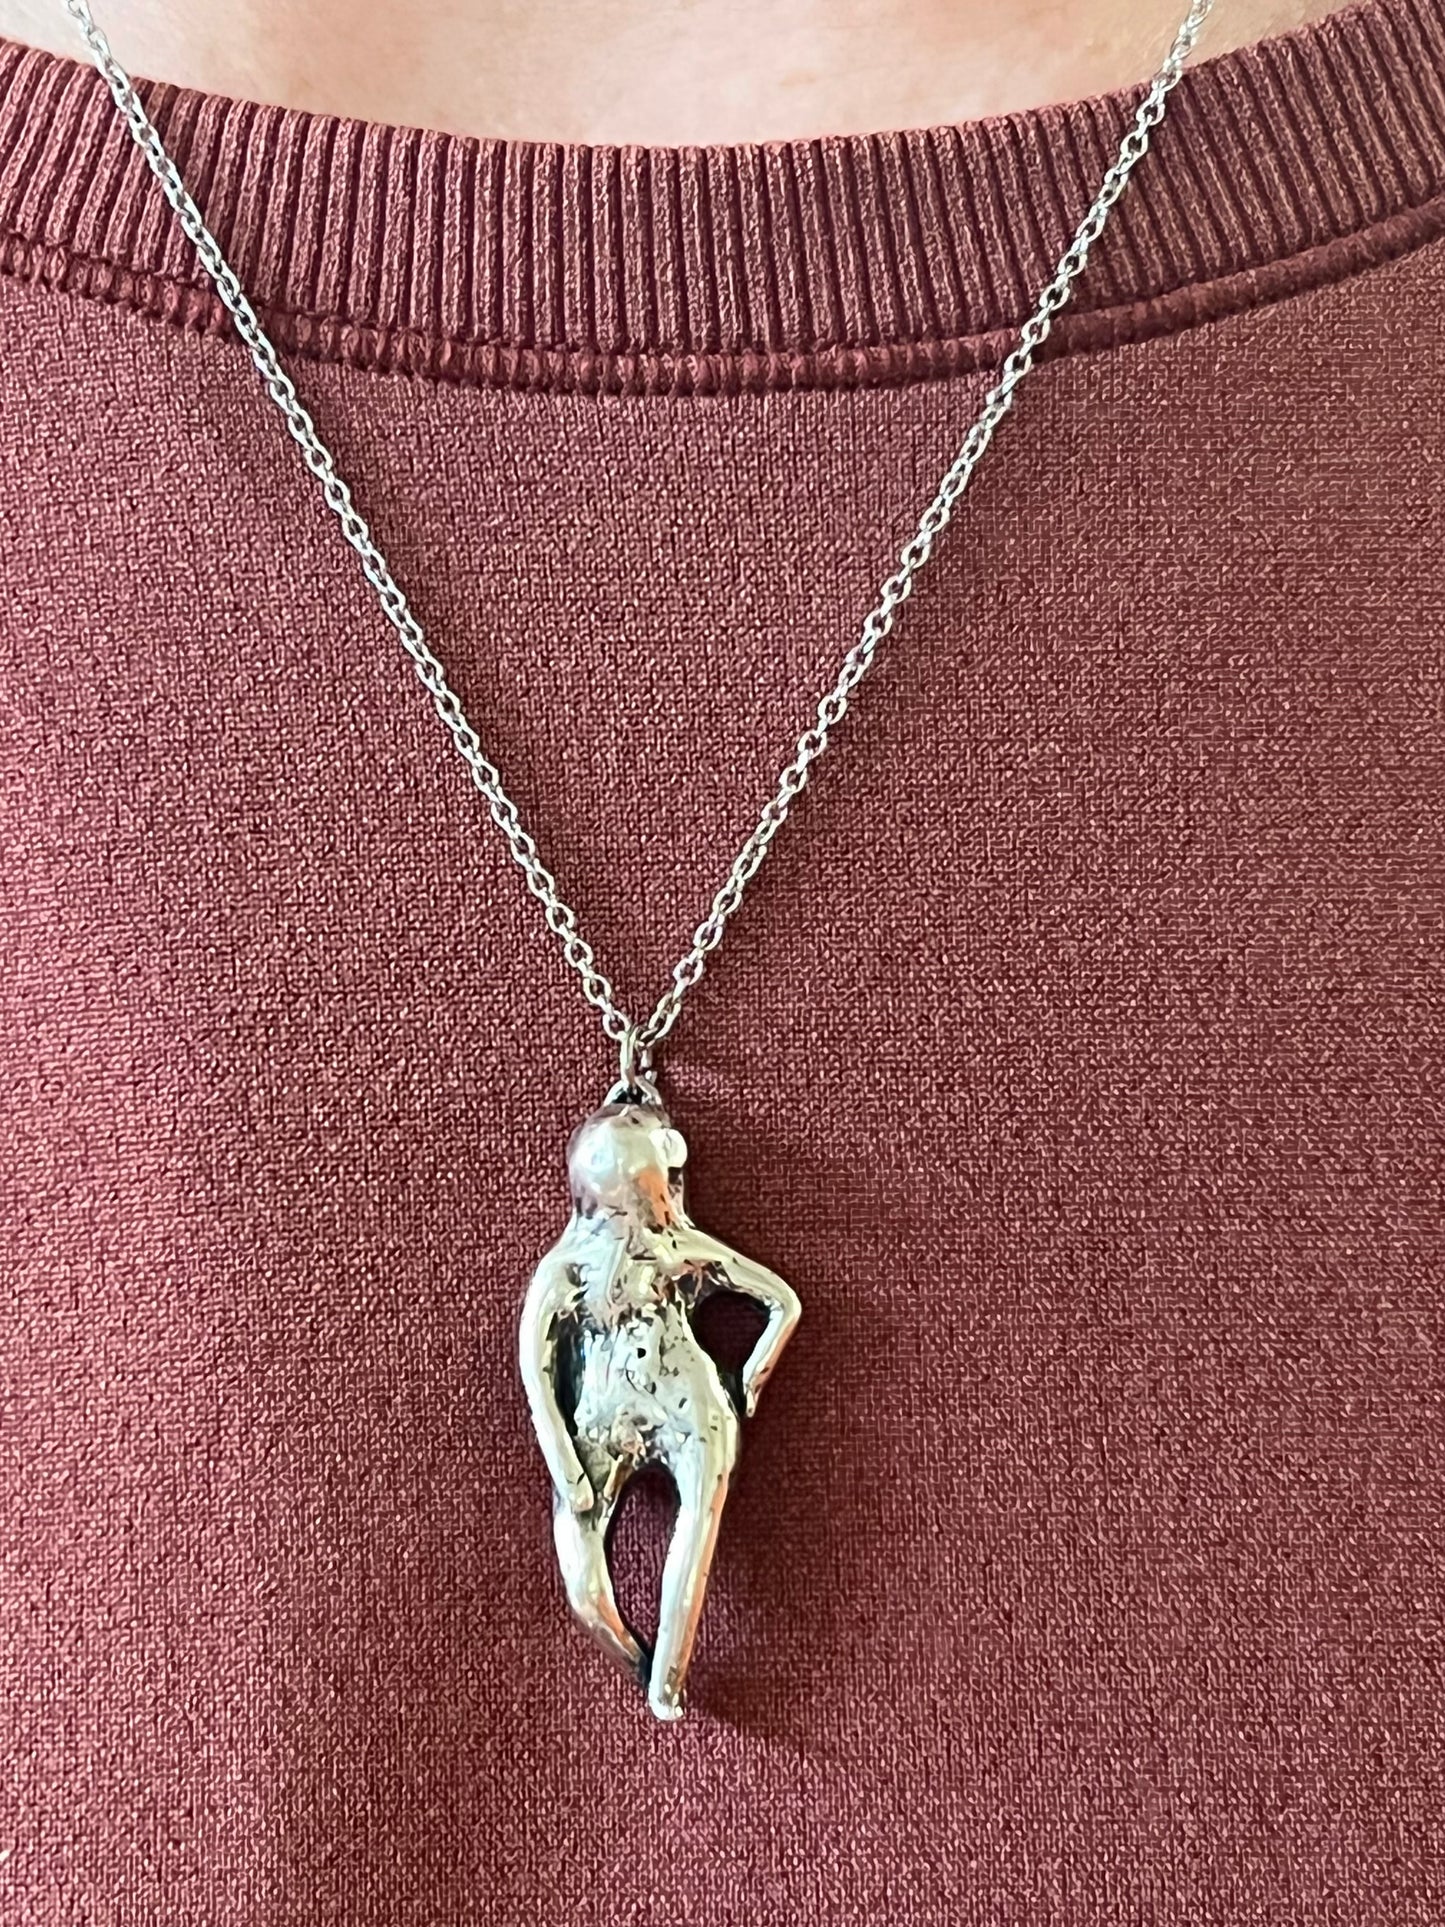 Chillin Necklace Buddy. Sterling silver pendant. 18 inch stainless steel chain. 1 5/8 inches tall.